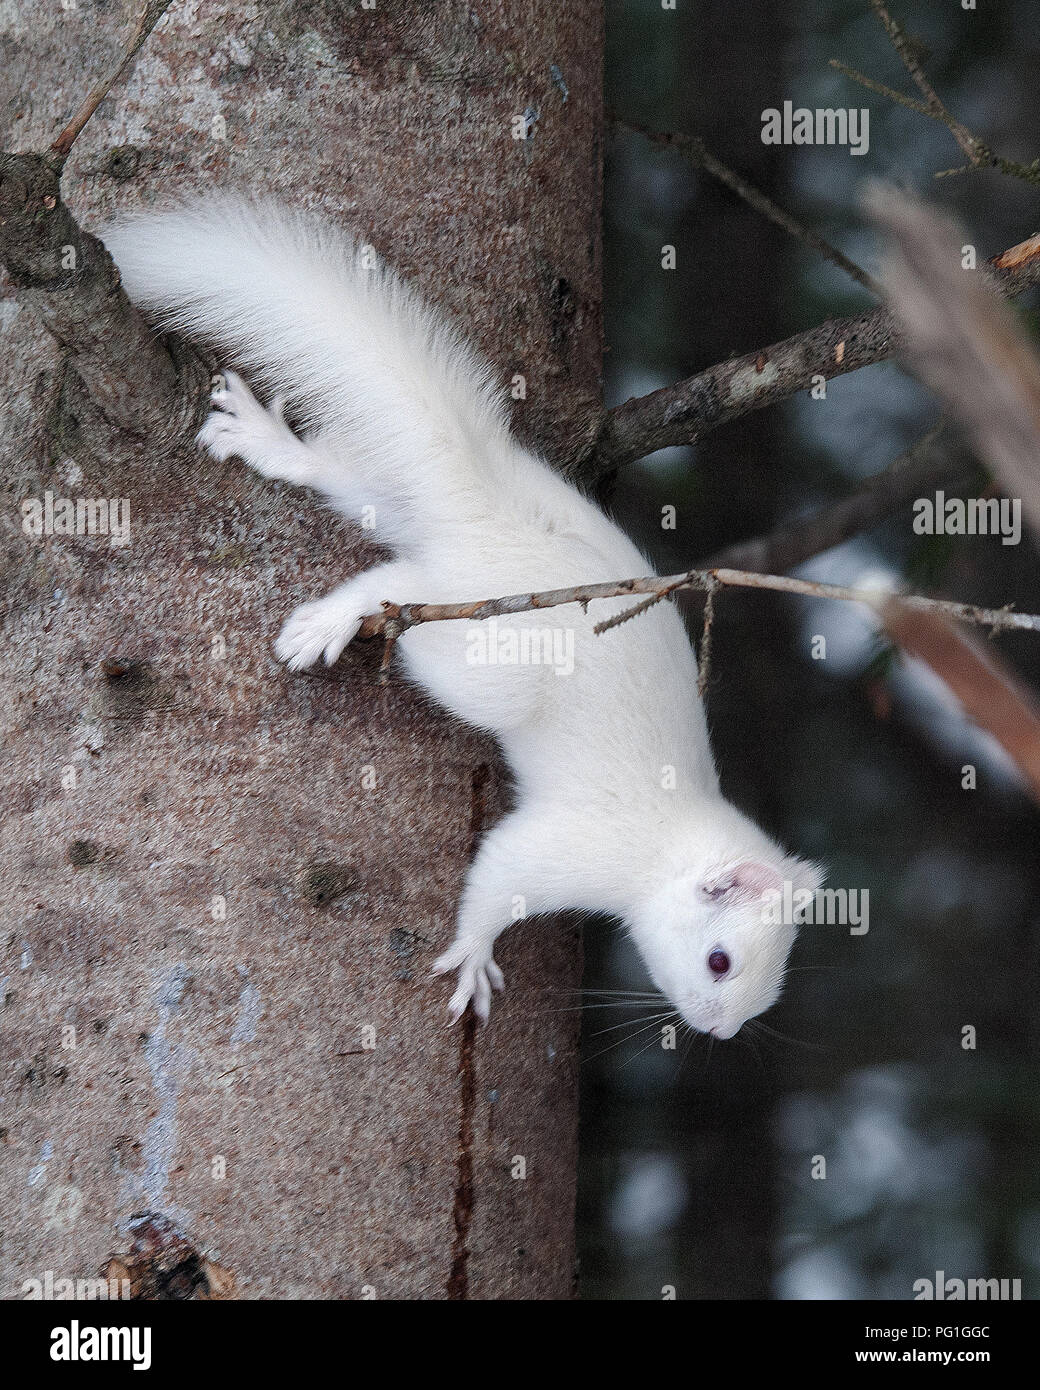 Albino Squirrel walking on a tree trunk in the forest, displaying white fur, red eyes in its environment and habitat. Image. Picture. Portrait. Stock Photo